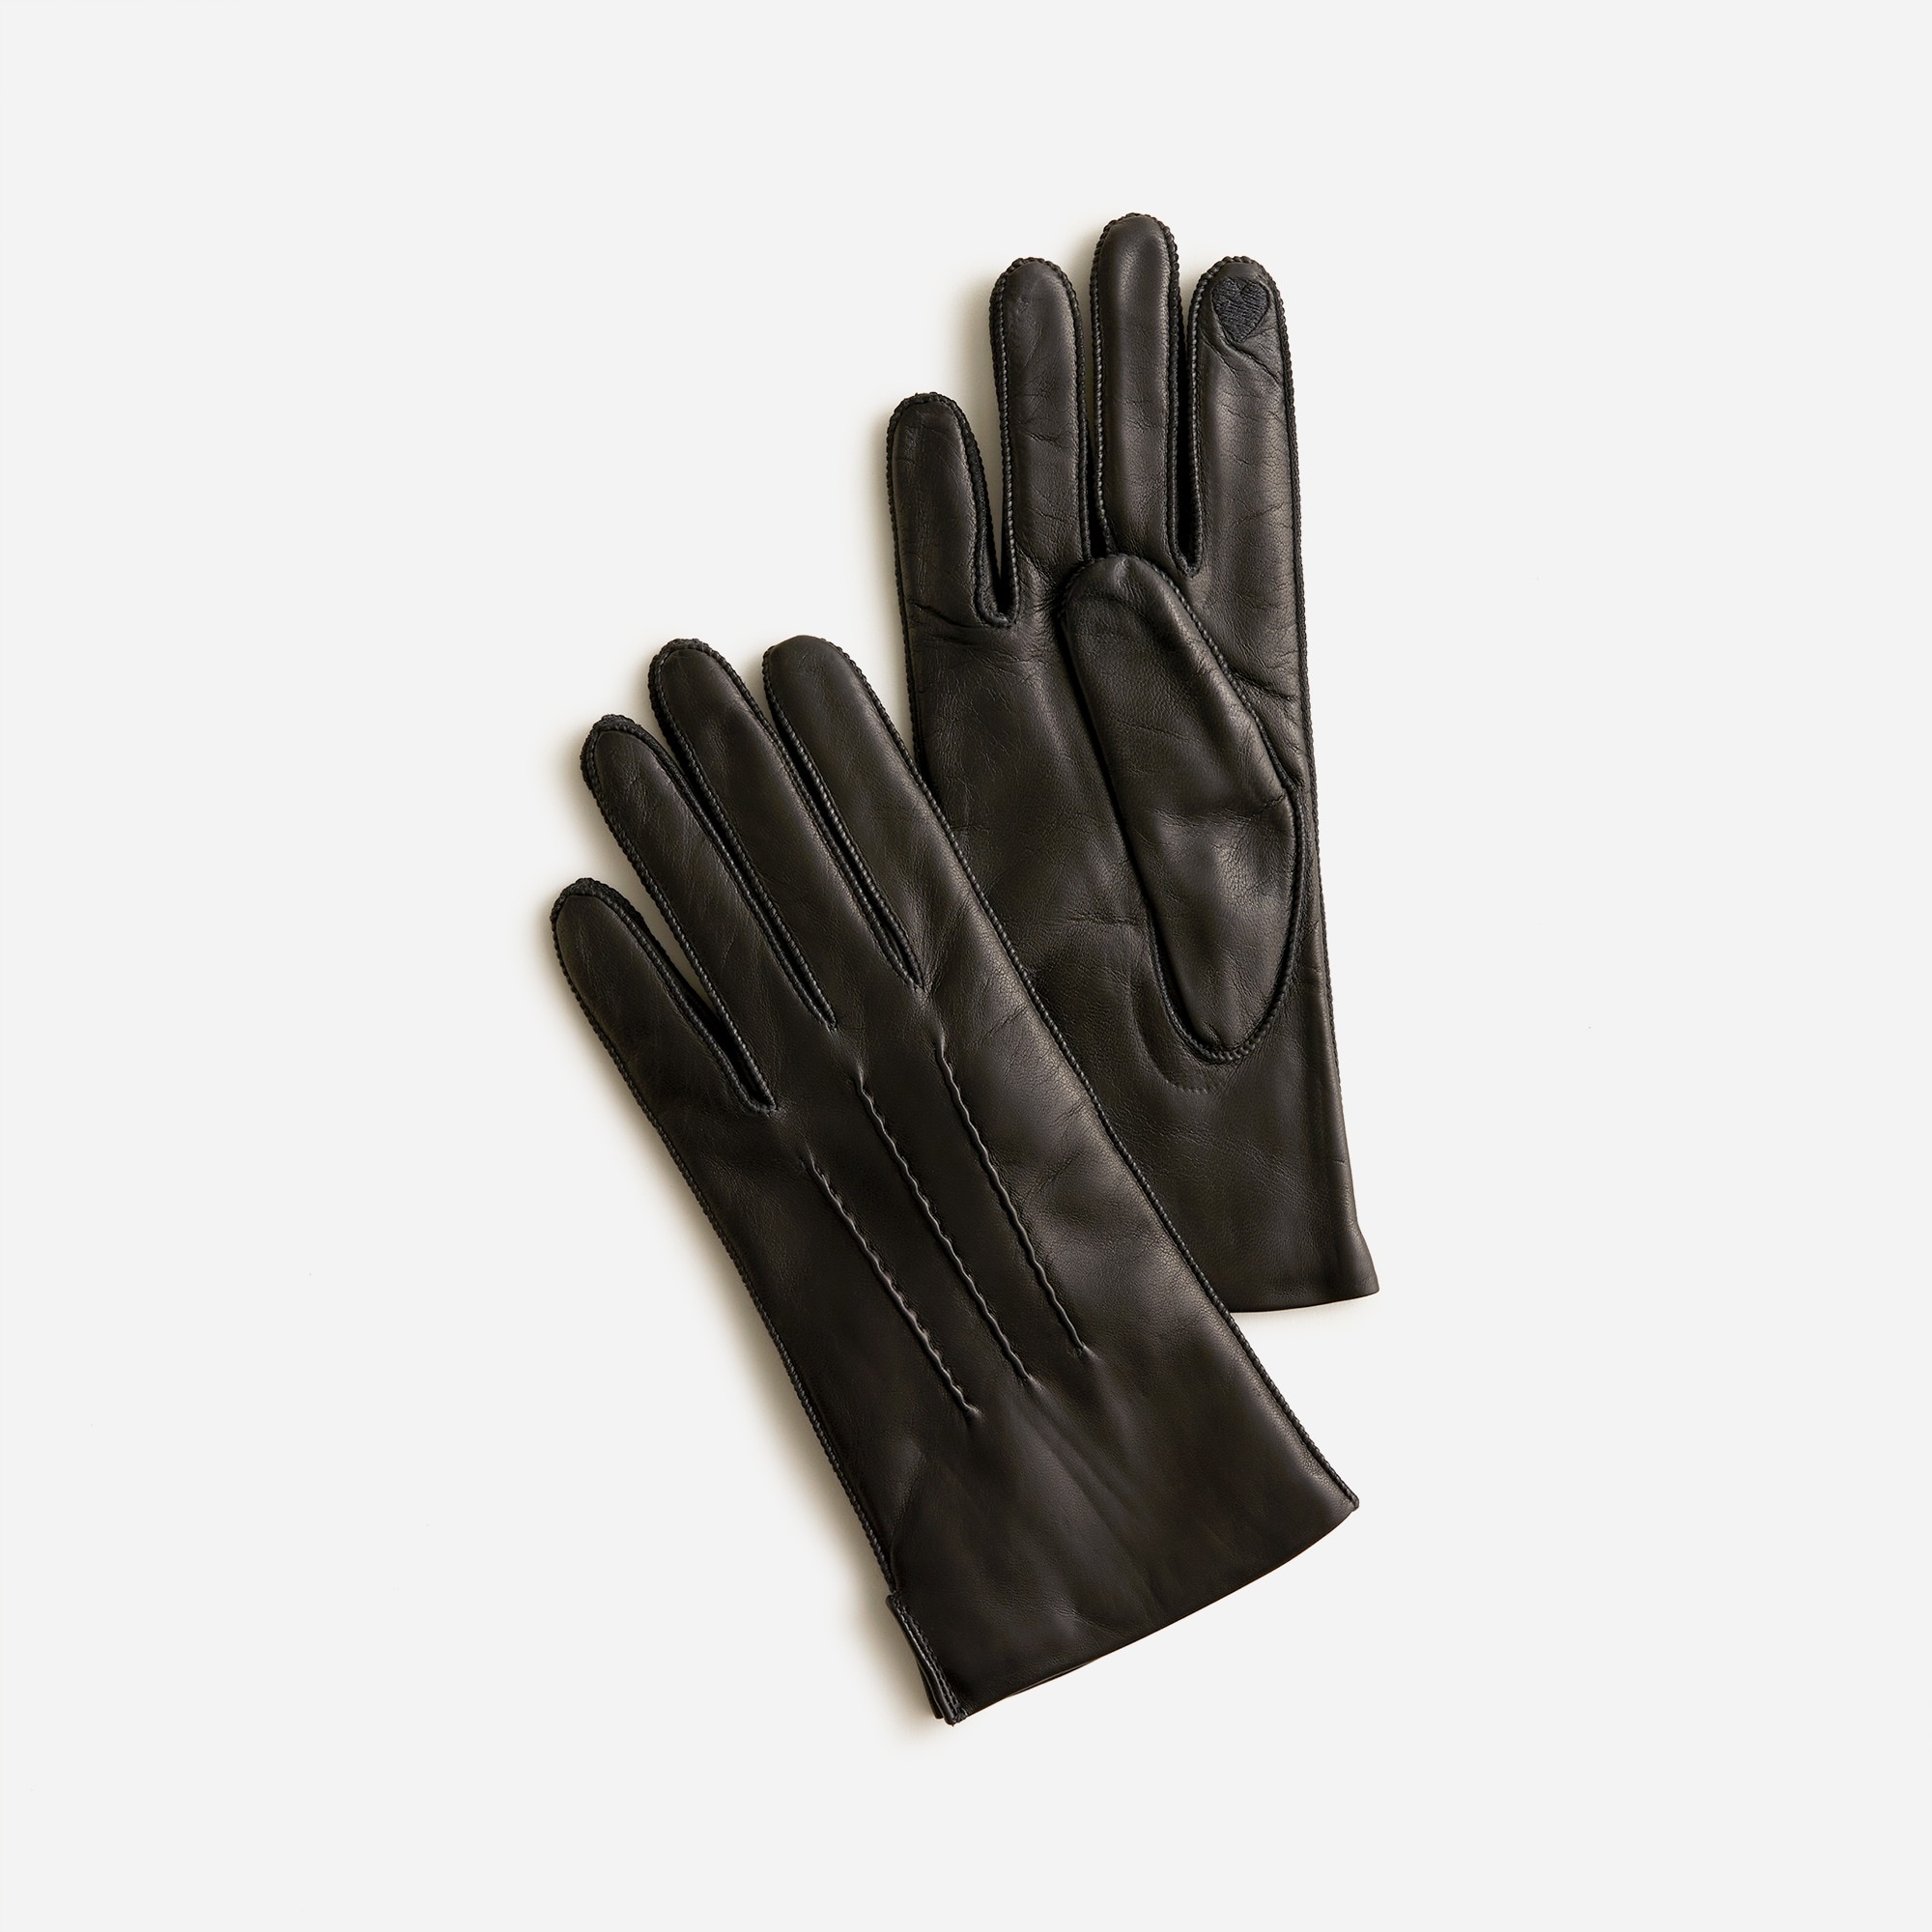  Italian leather tech-touch gloves